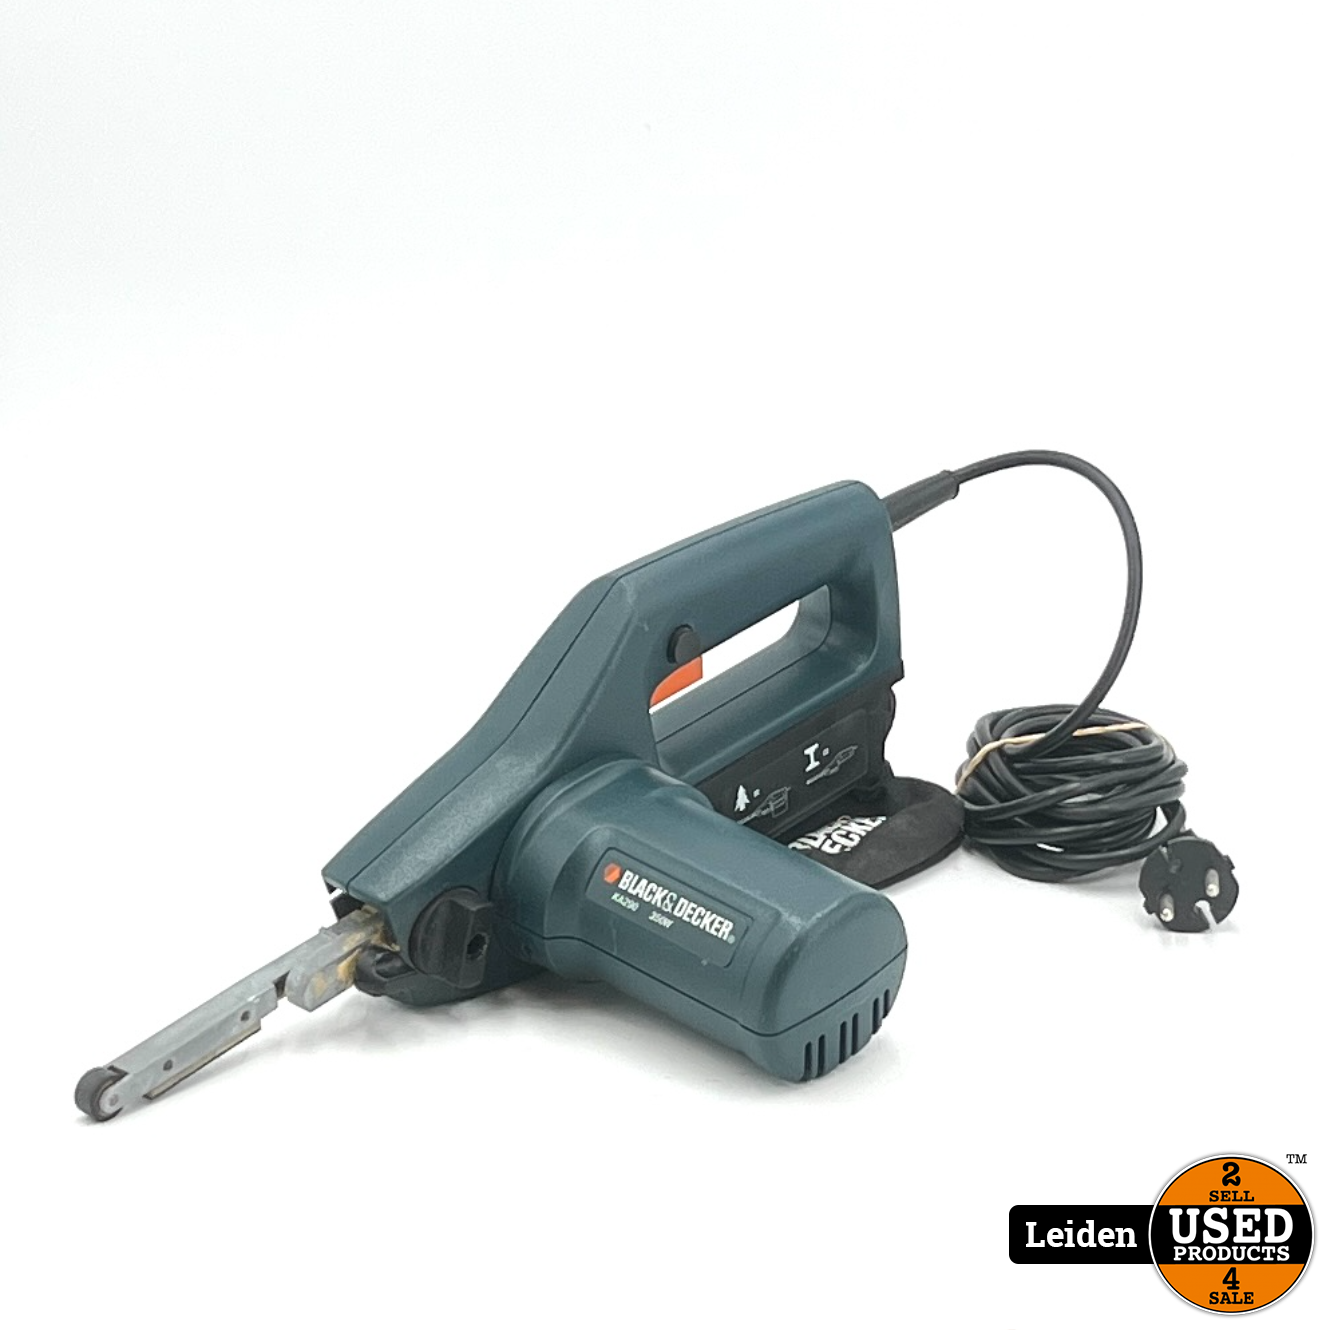 roze Scepticisme motor Black and Decker KA290 Bandschuurmachine - Used Products Leiden